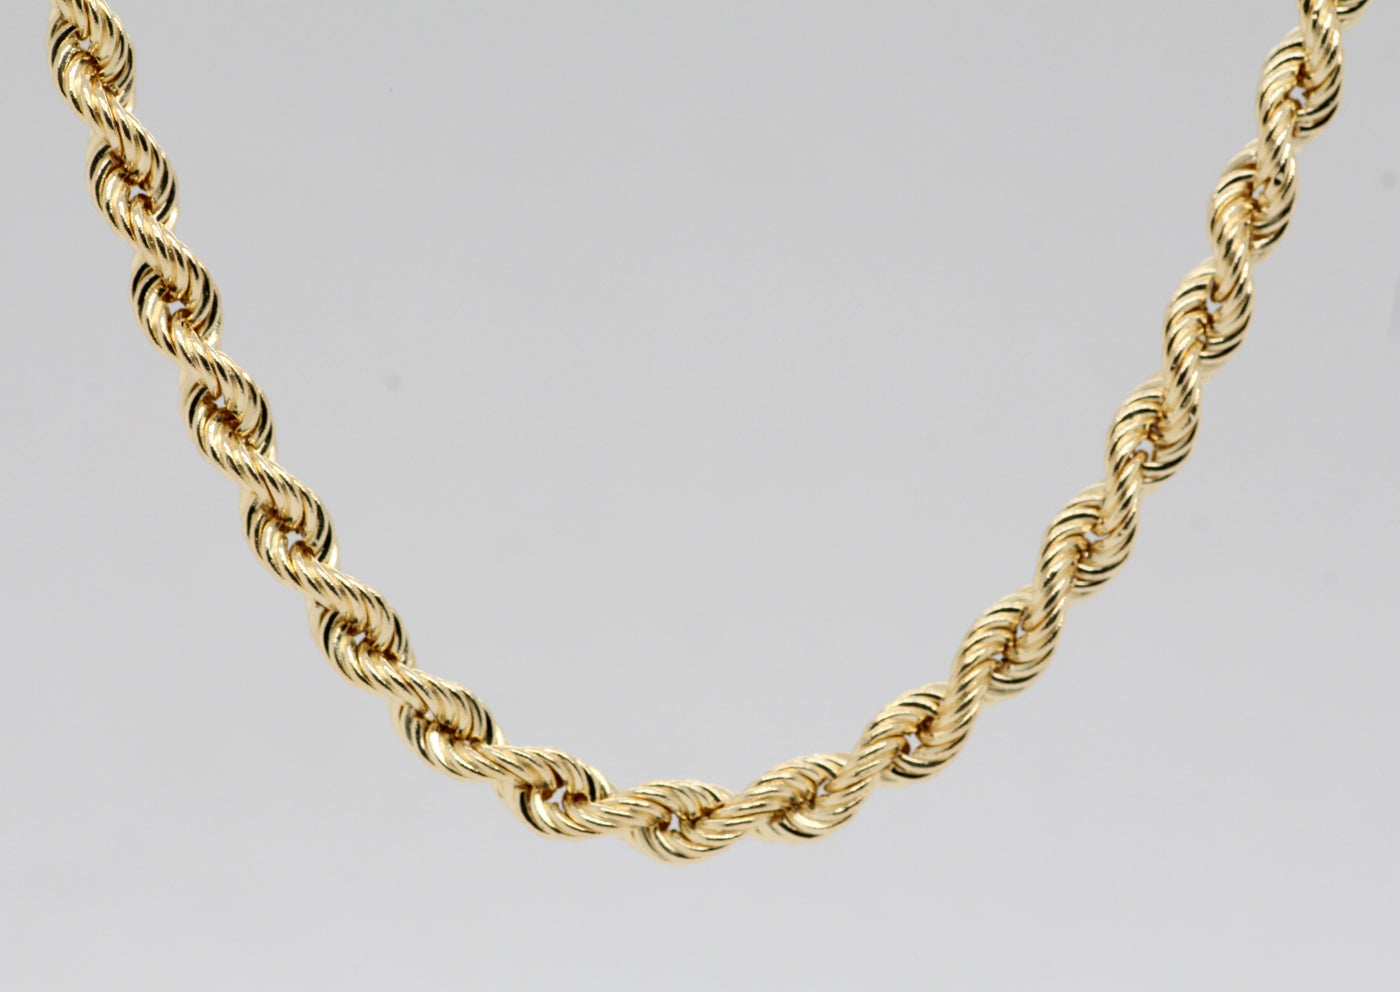 Estate 14KY 18" 3.5 mm Rope Chain